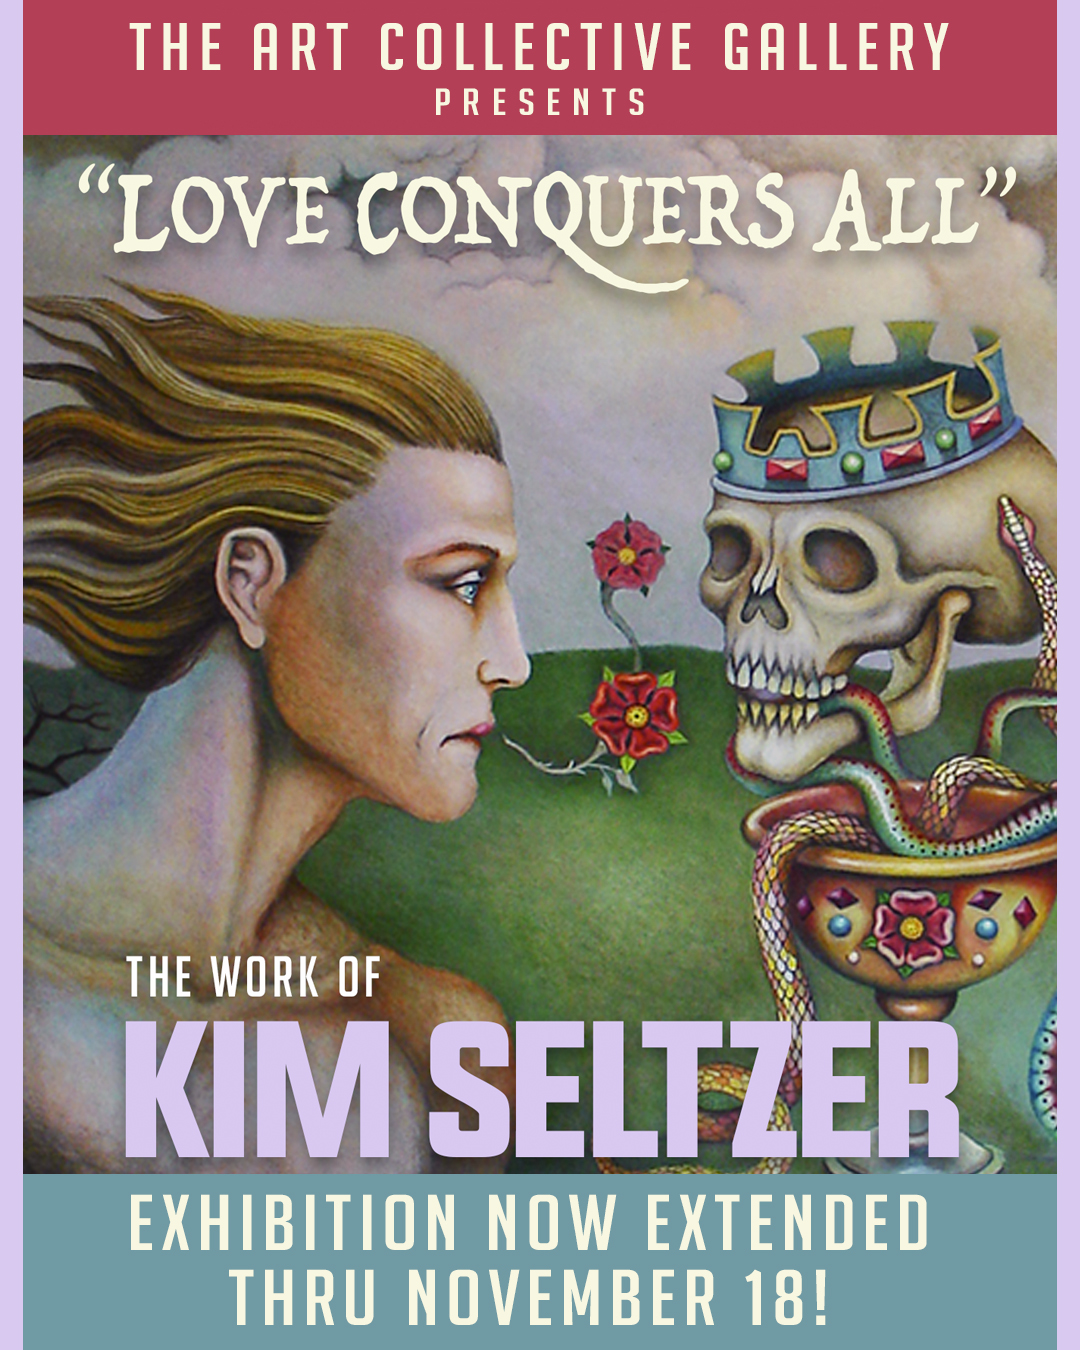 The Art of Kim Seltzer   “Love Conquers All”